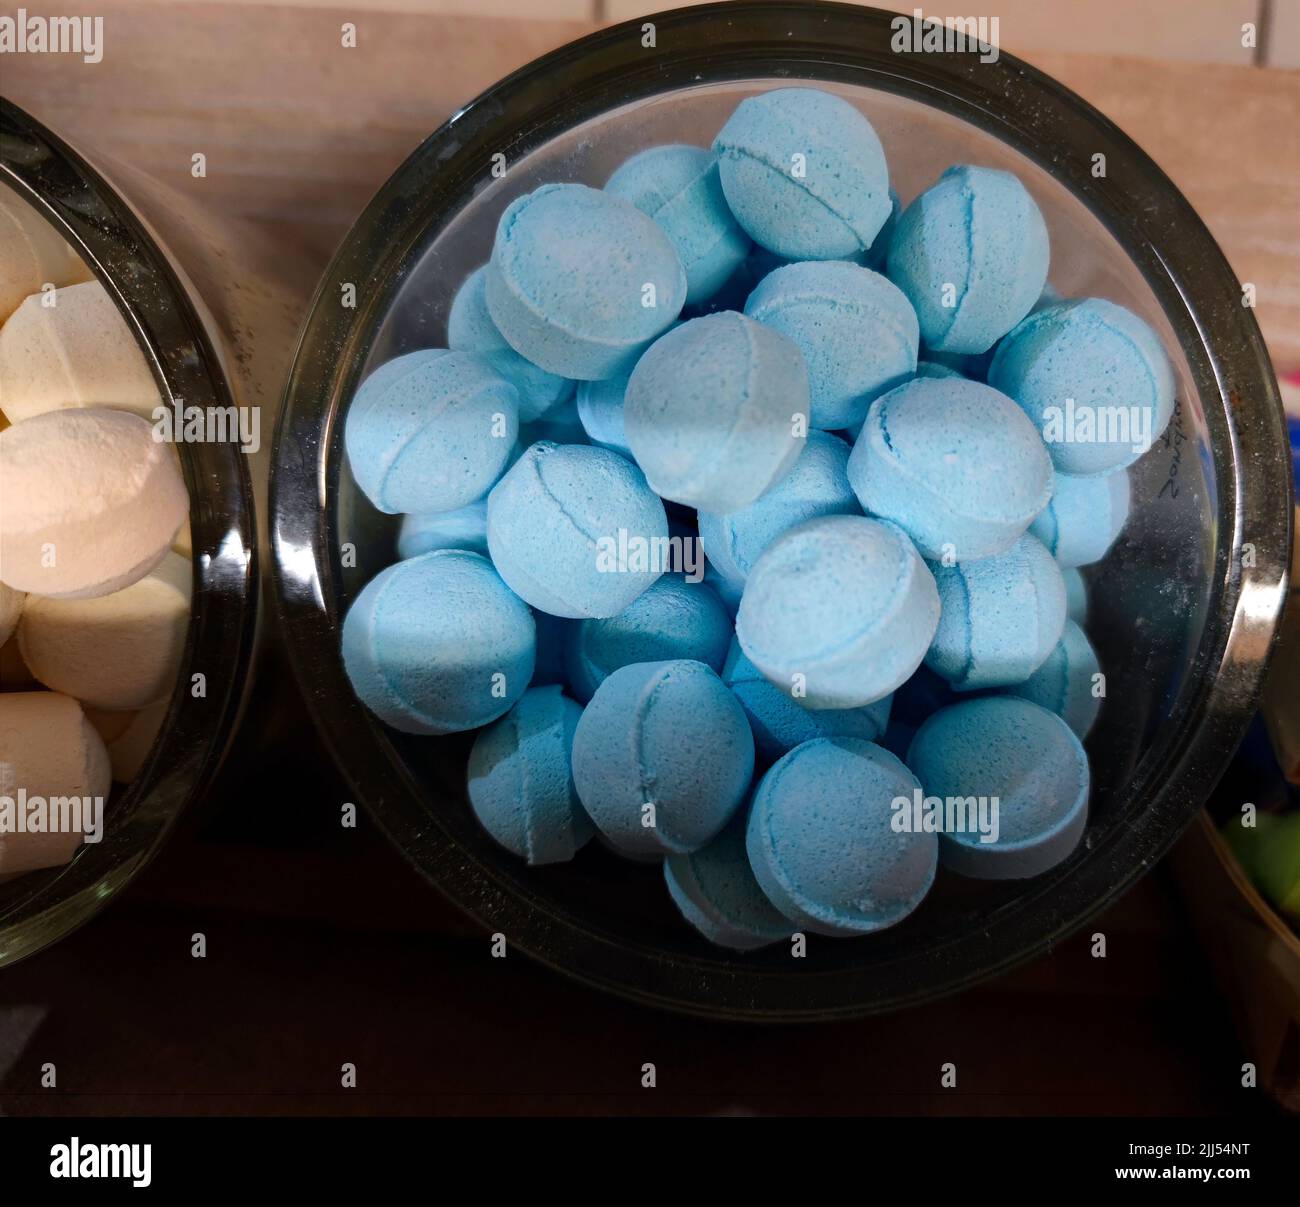 Blue unmarked bath bombs in a jar. There are no people or trademarks in the shot. Stock Photo